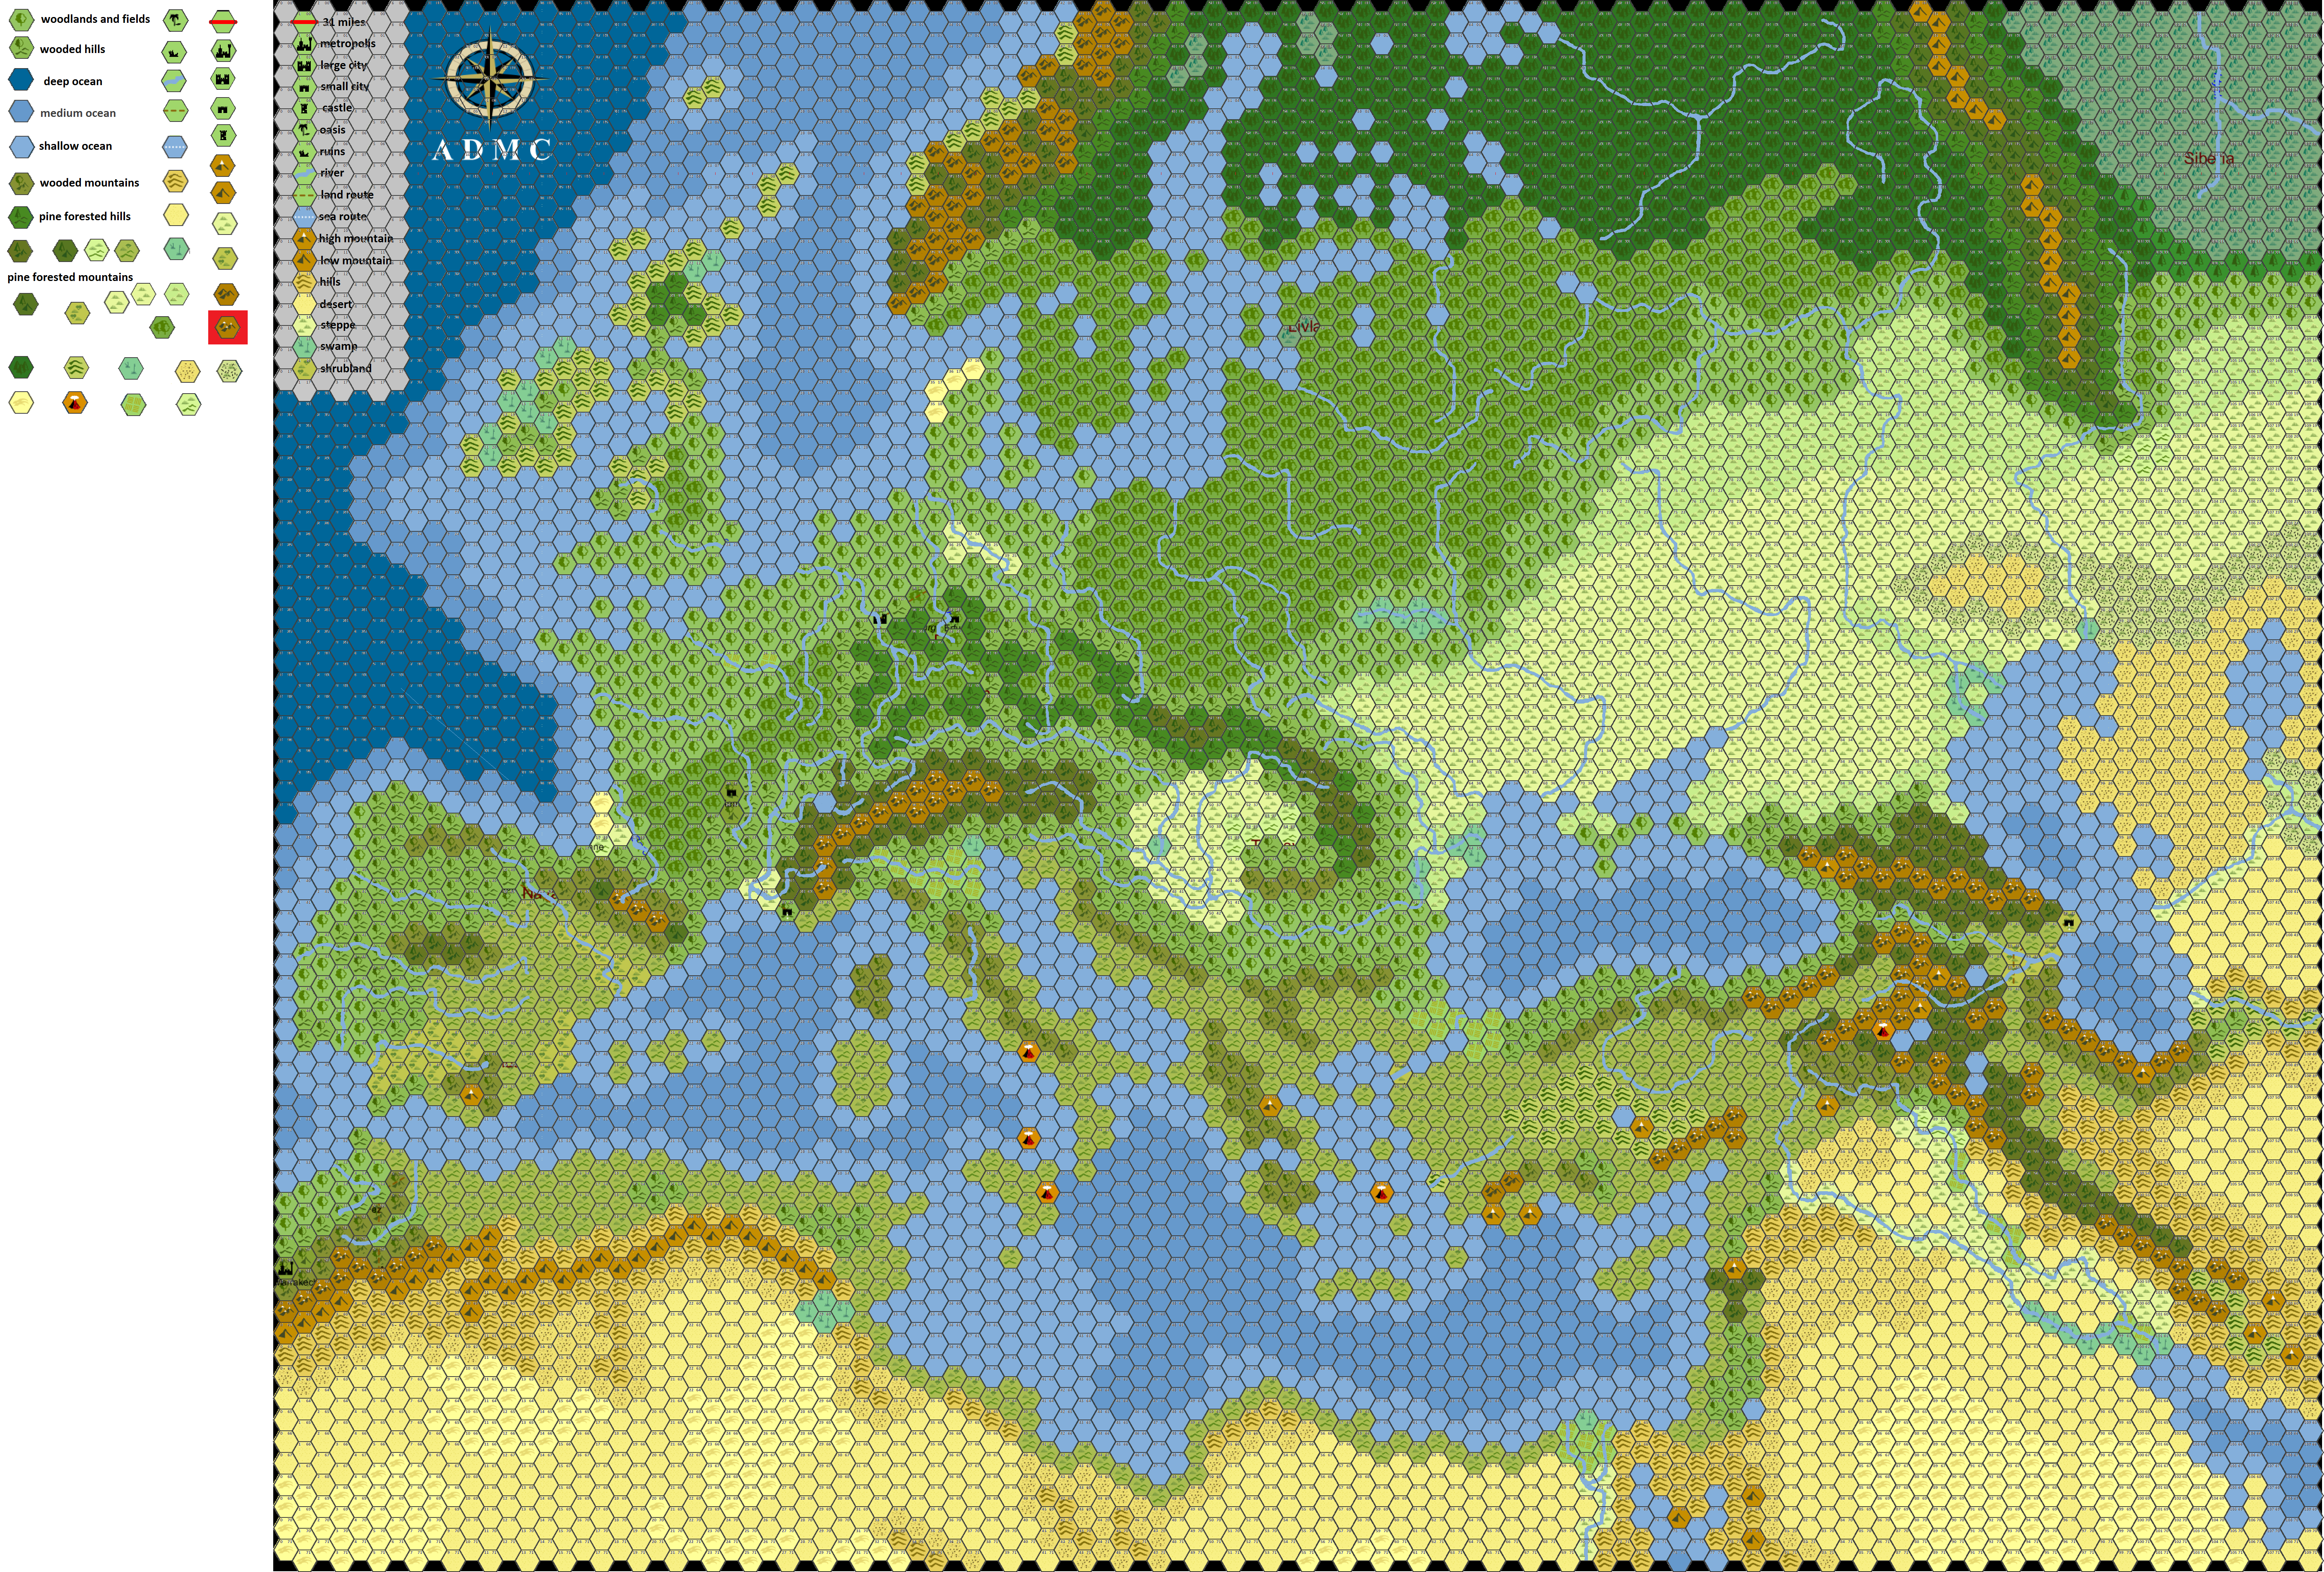 europe_1100_ad_numbered_hex_map_by_thomasbowman255-dc5v4xz.png